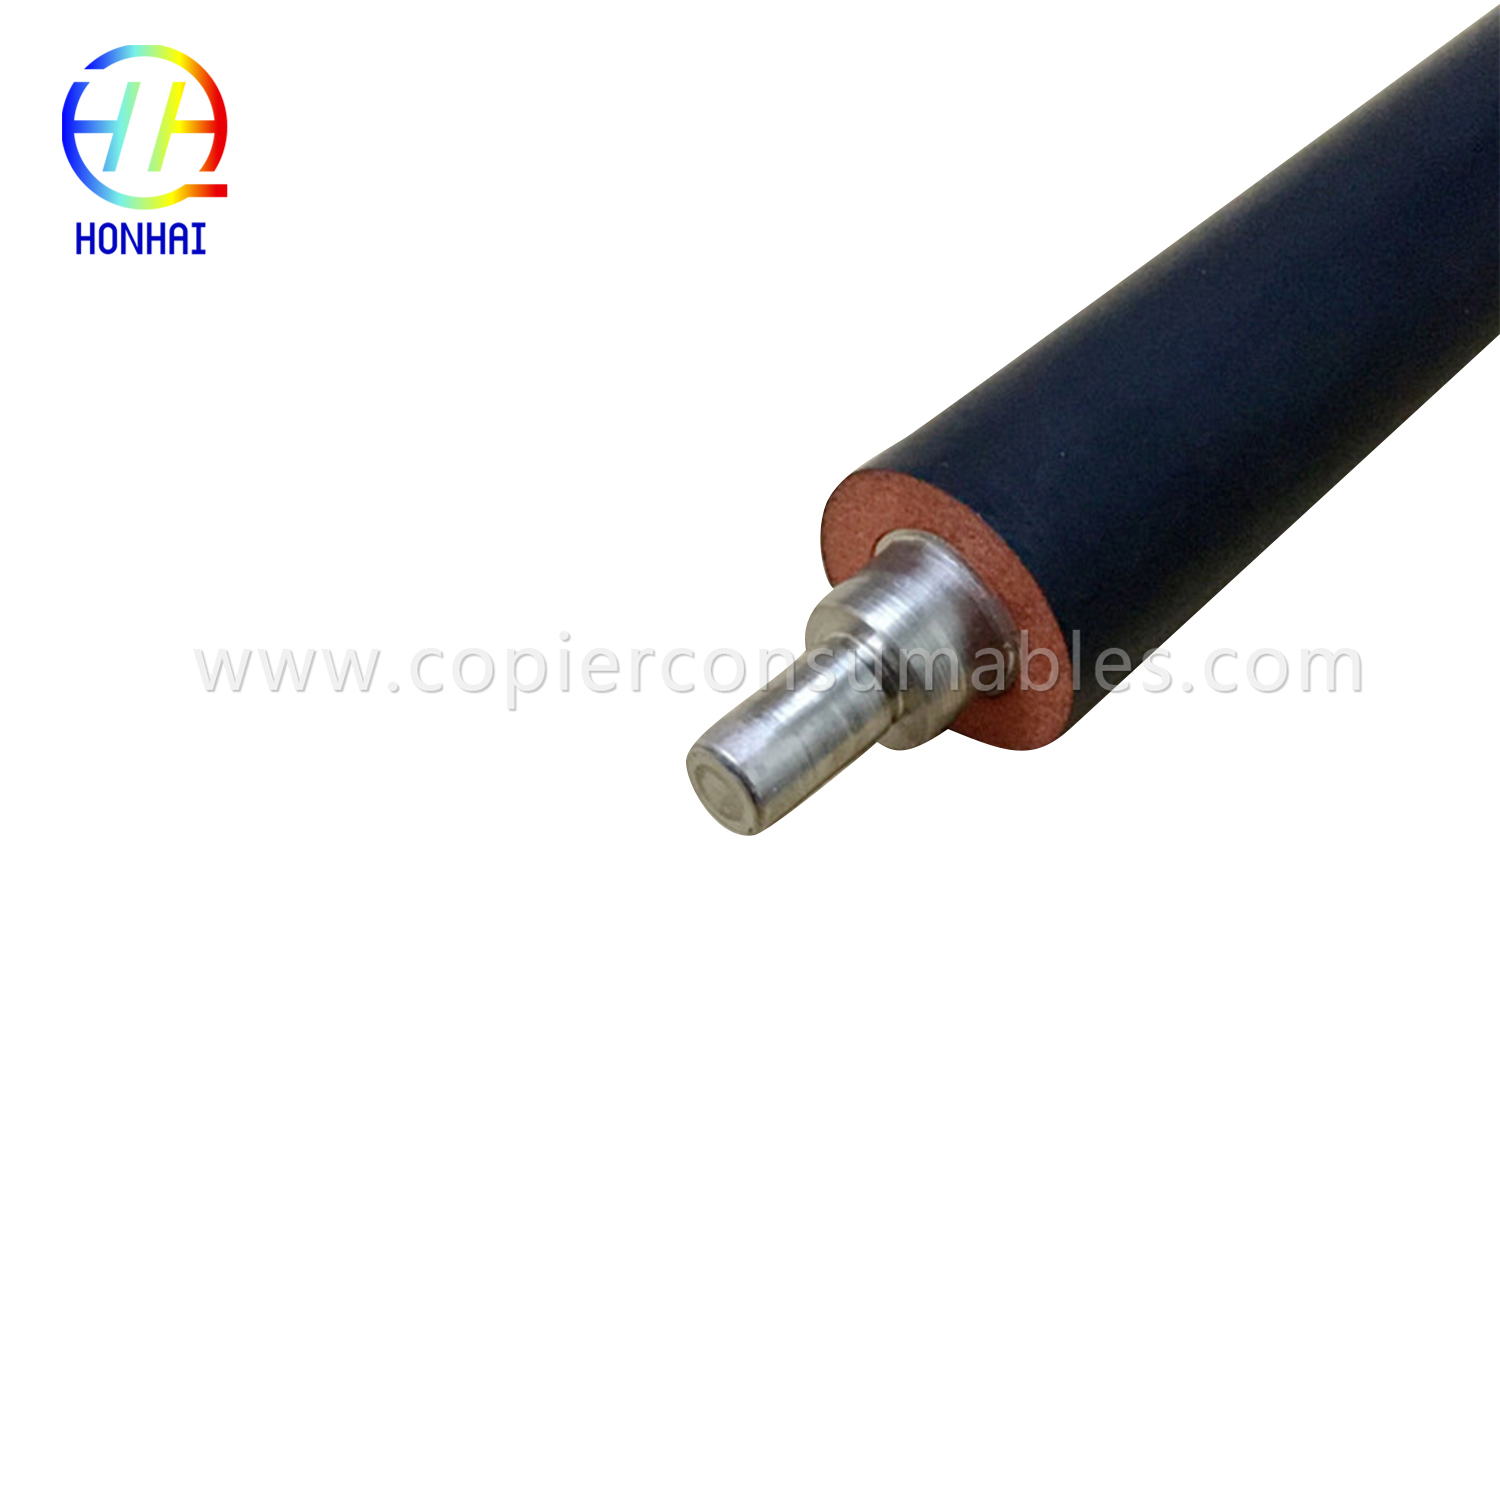 Lower Pressure Roller for HP M1212 M1536 P1606 (3)